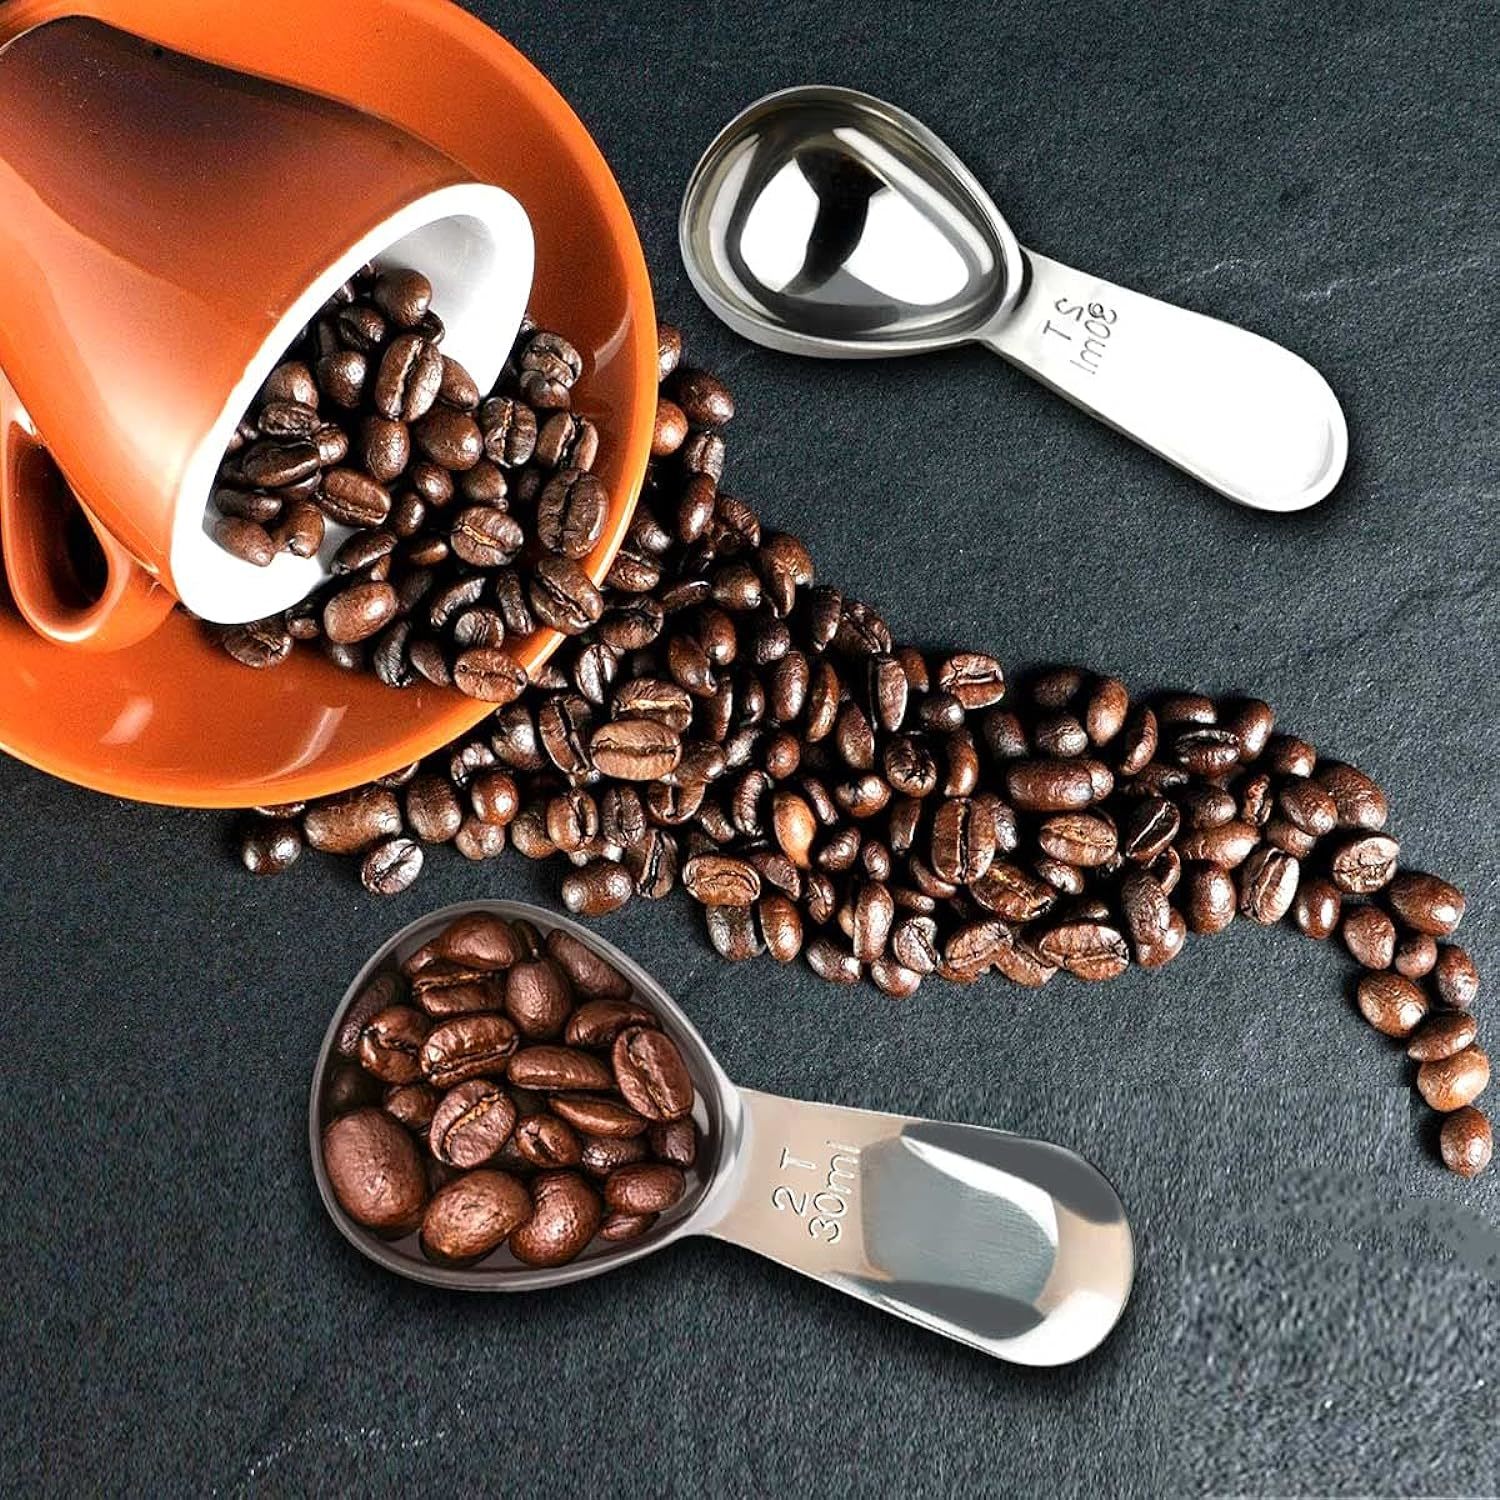 Norpro Stainless Steel Coffee Scoop with Bag Clip